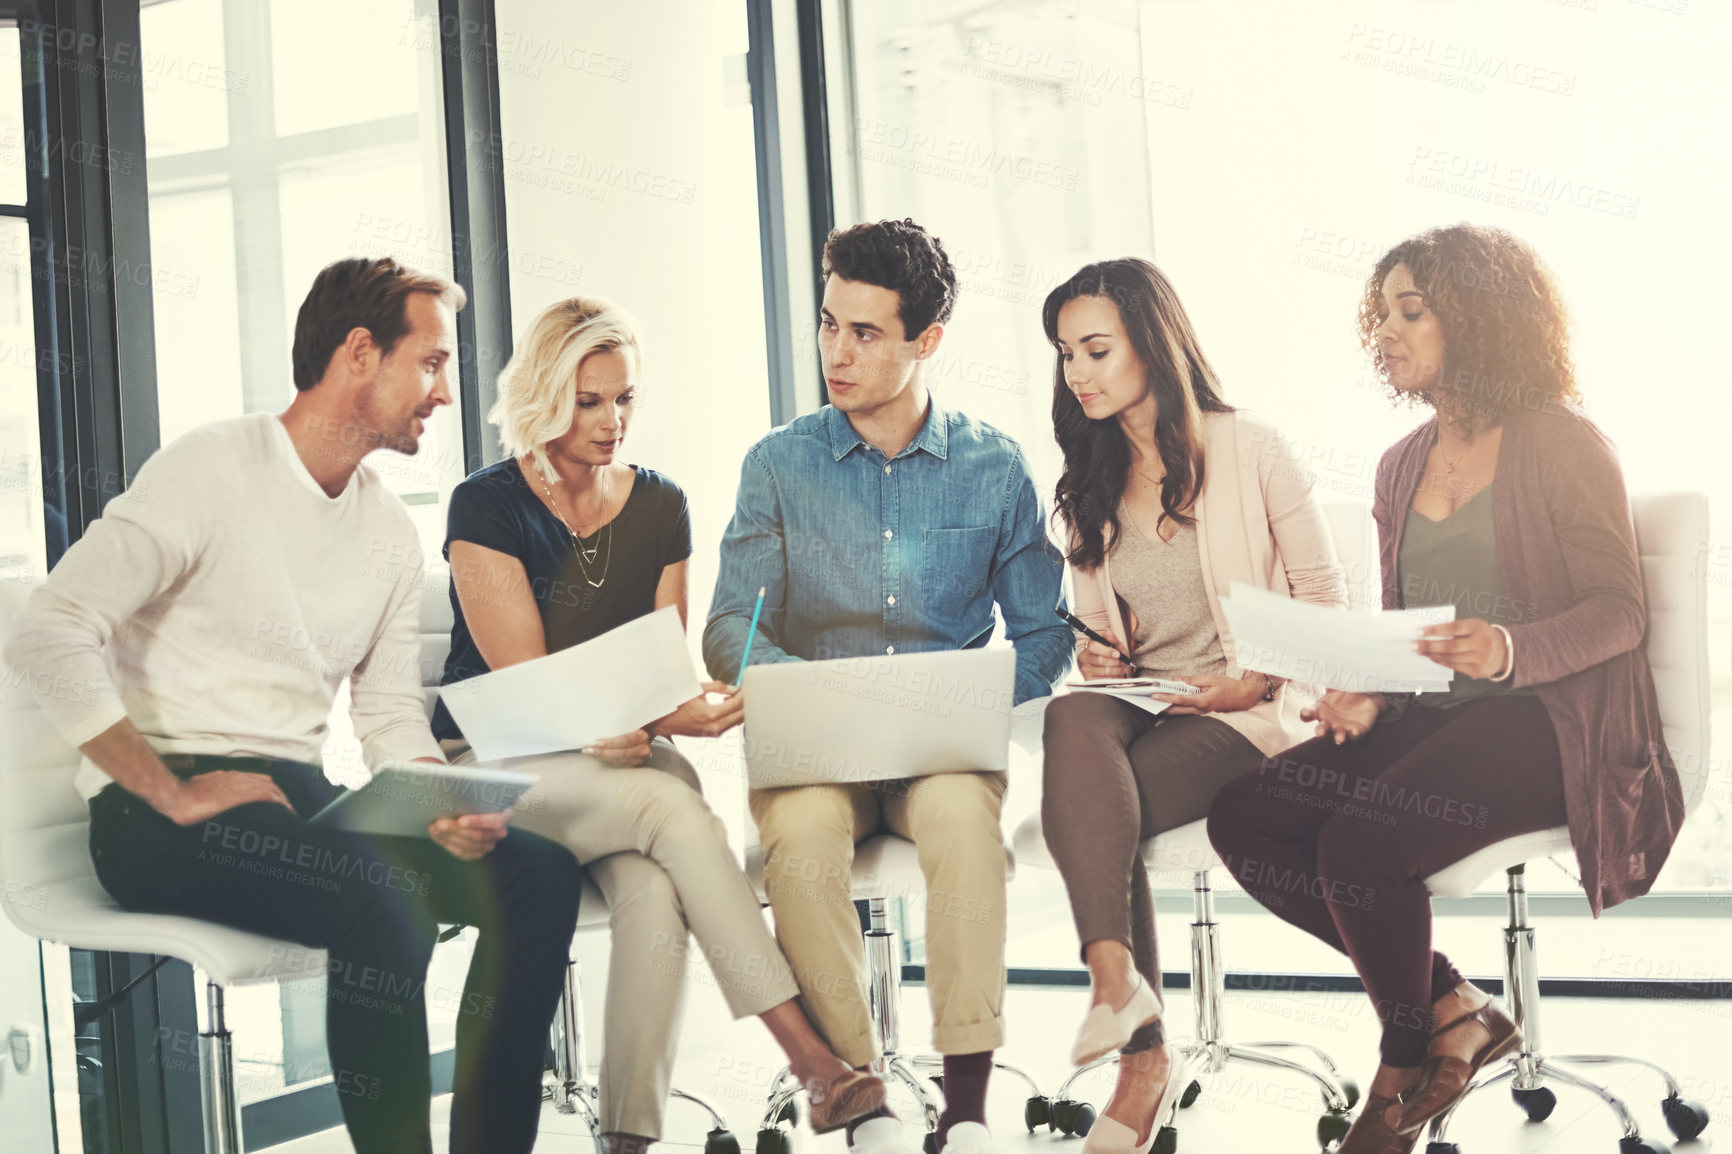 Buy stock photo Shot of a team of designers brainstorming together in an office